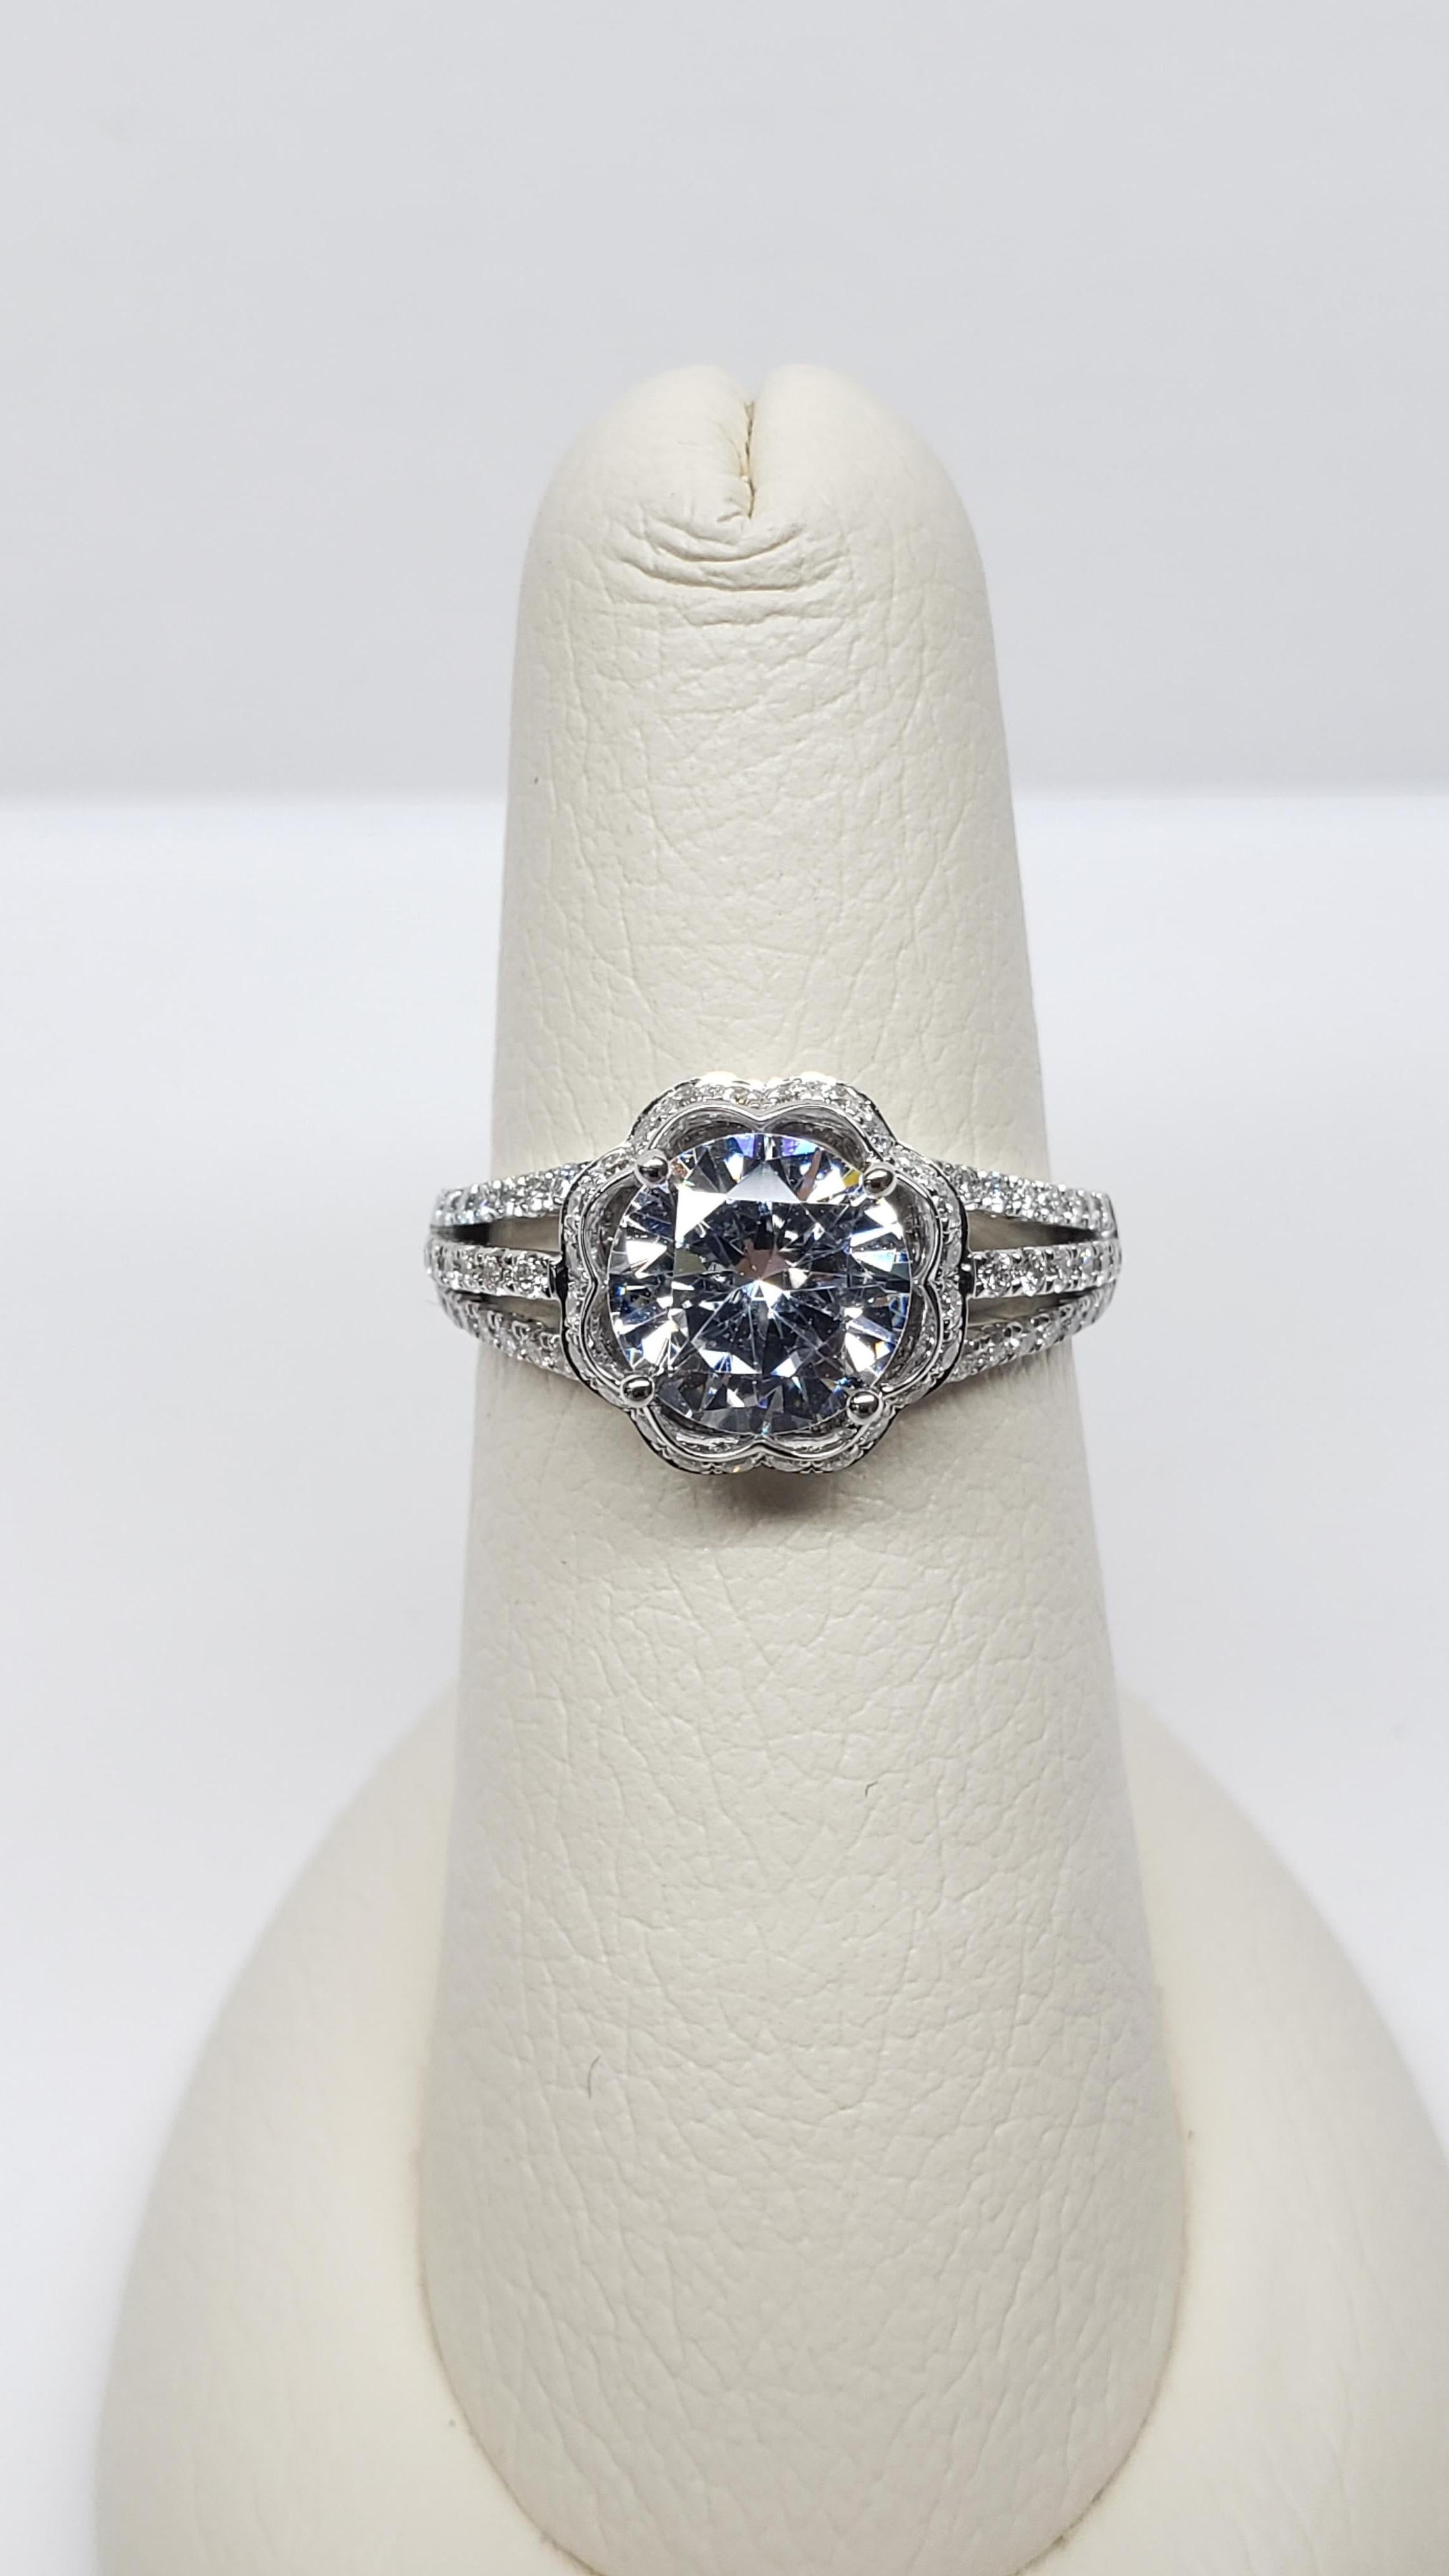 This semi mount was designed by Simon G. and is made from 18k white gold. It features a flower shaped diamond halo, a double split shank with pave diamonds along the upper half. The gallery has some delicate scroll work, and the center stone is set